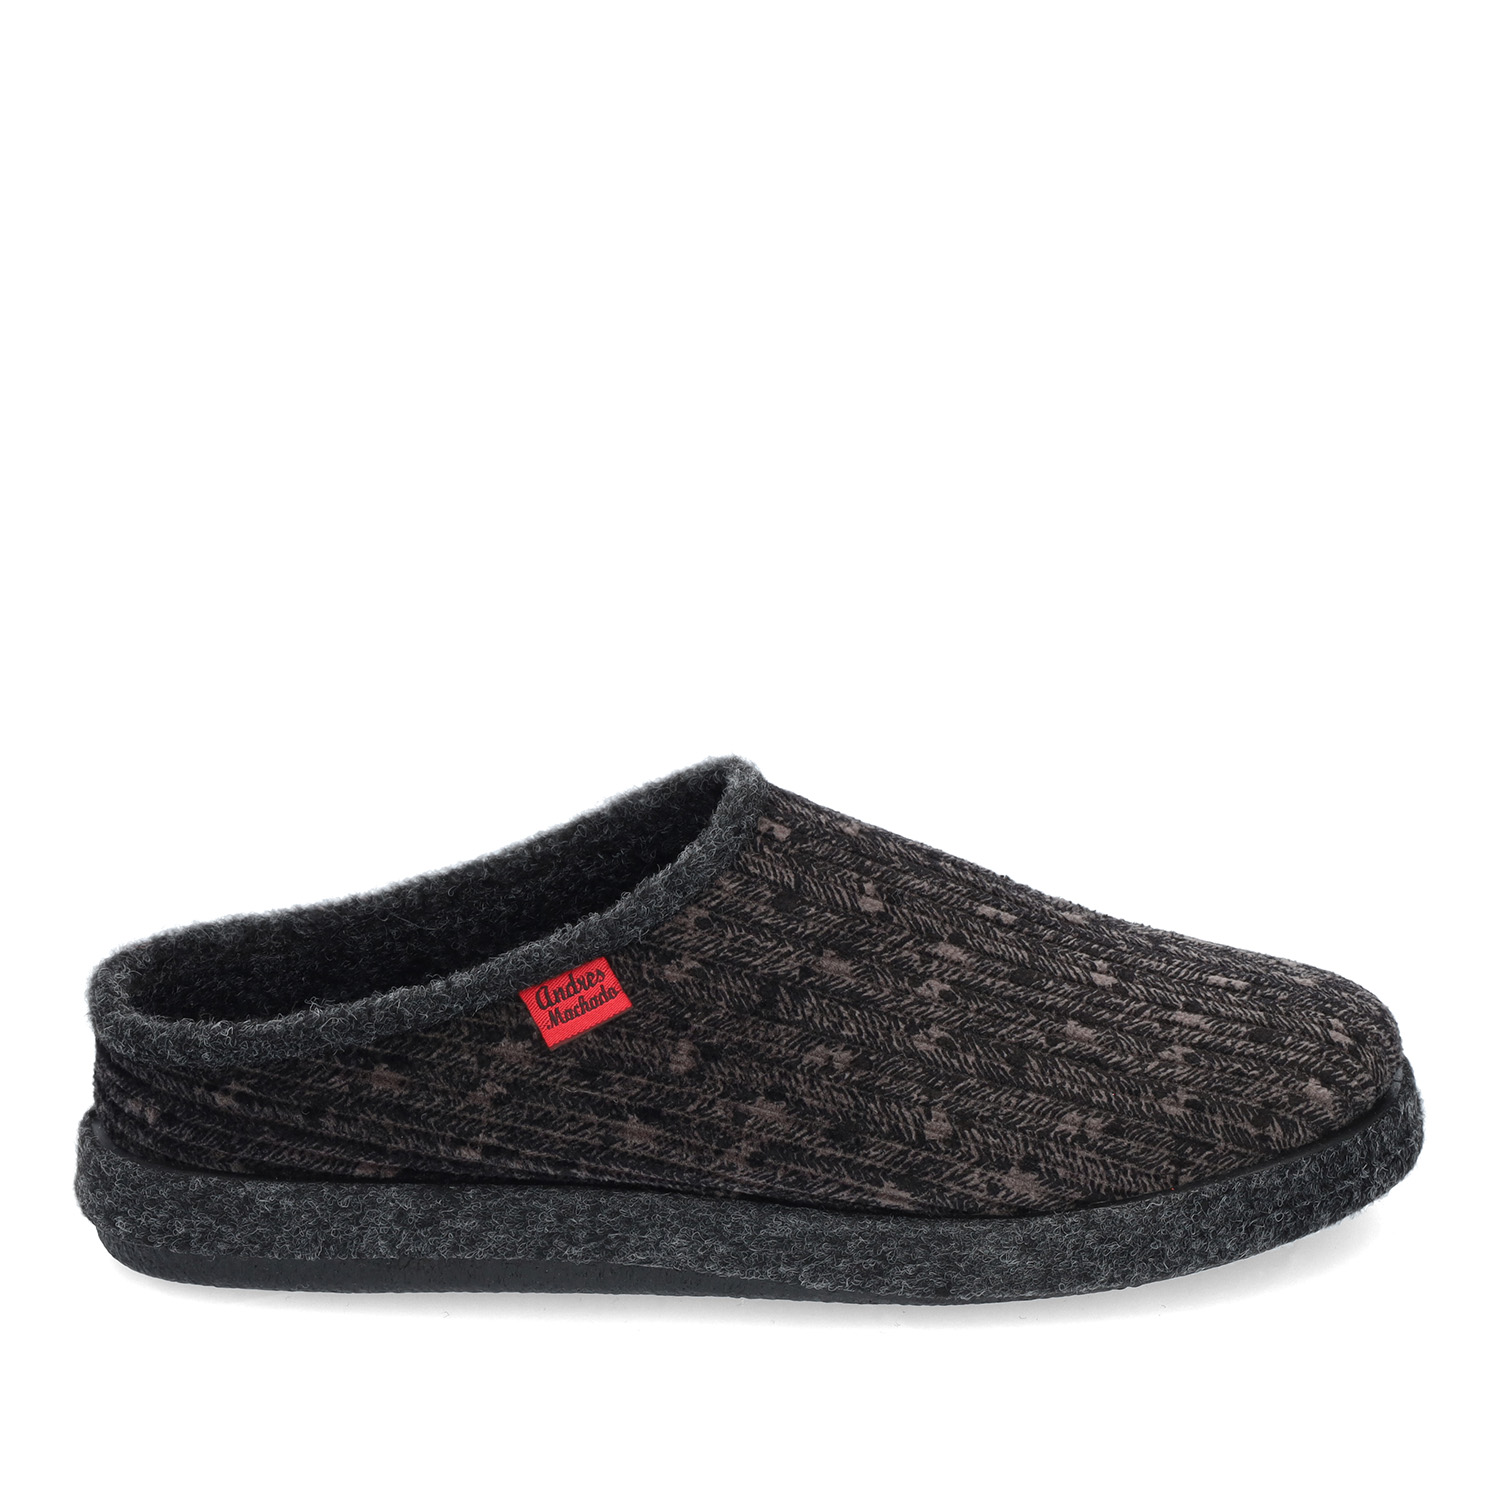 Very comfortable Grey Corduroy Slippers with footbed 